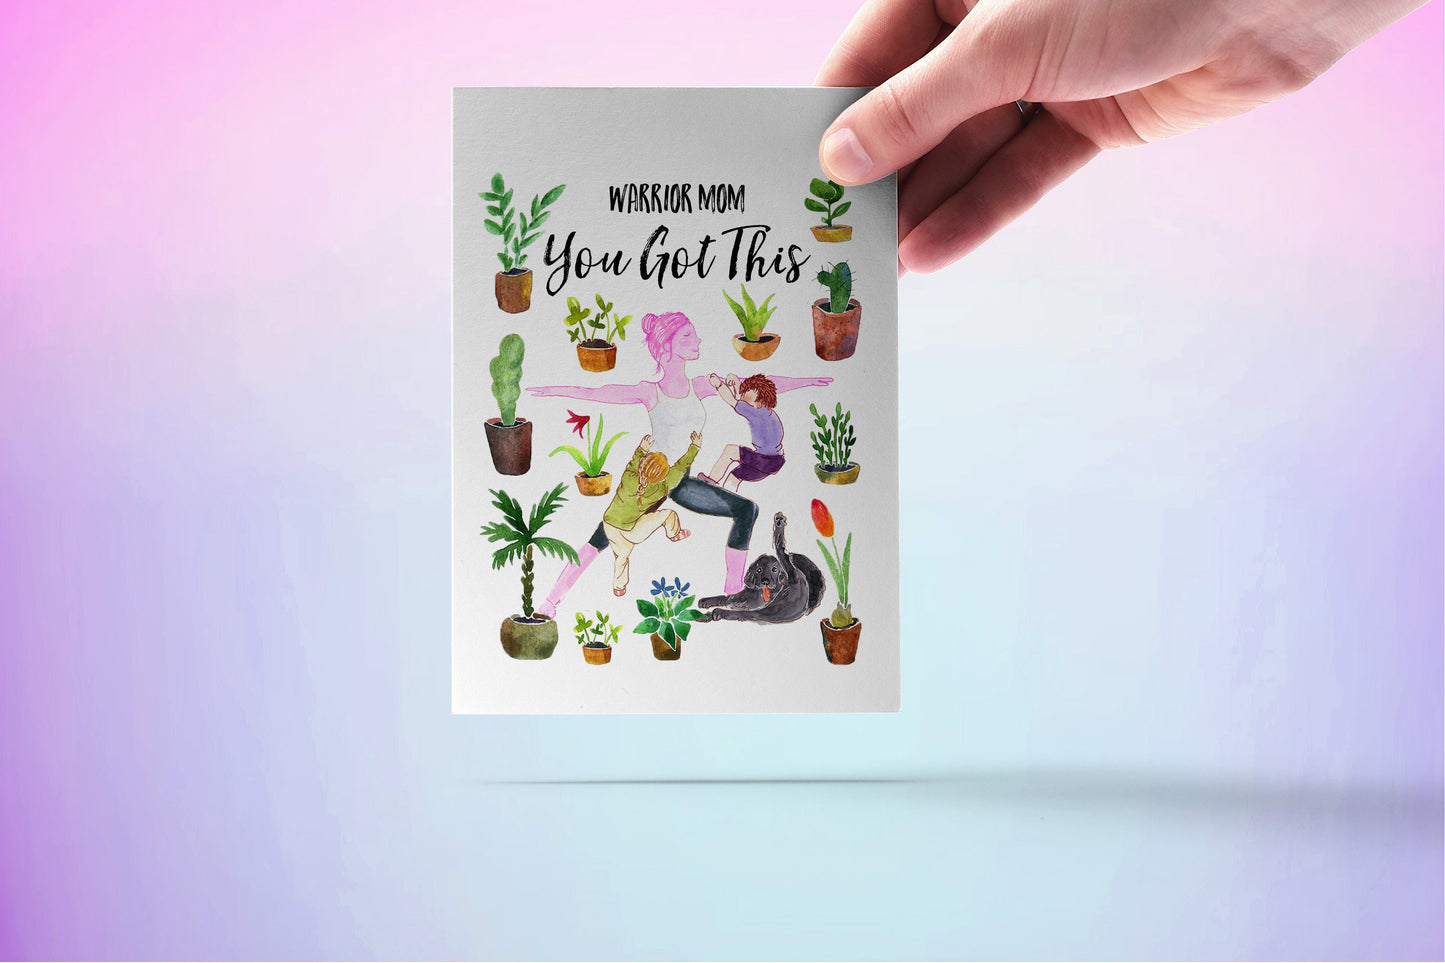 Yoga Botanical Funny Mom Card, Plant Mom Gifts For Best Friend, Funny Mother Birthday Cards, Warrior Post Encouragement Card You Got This